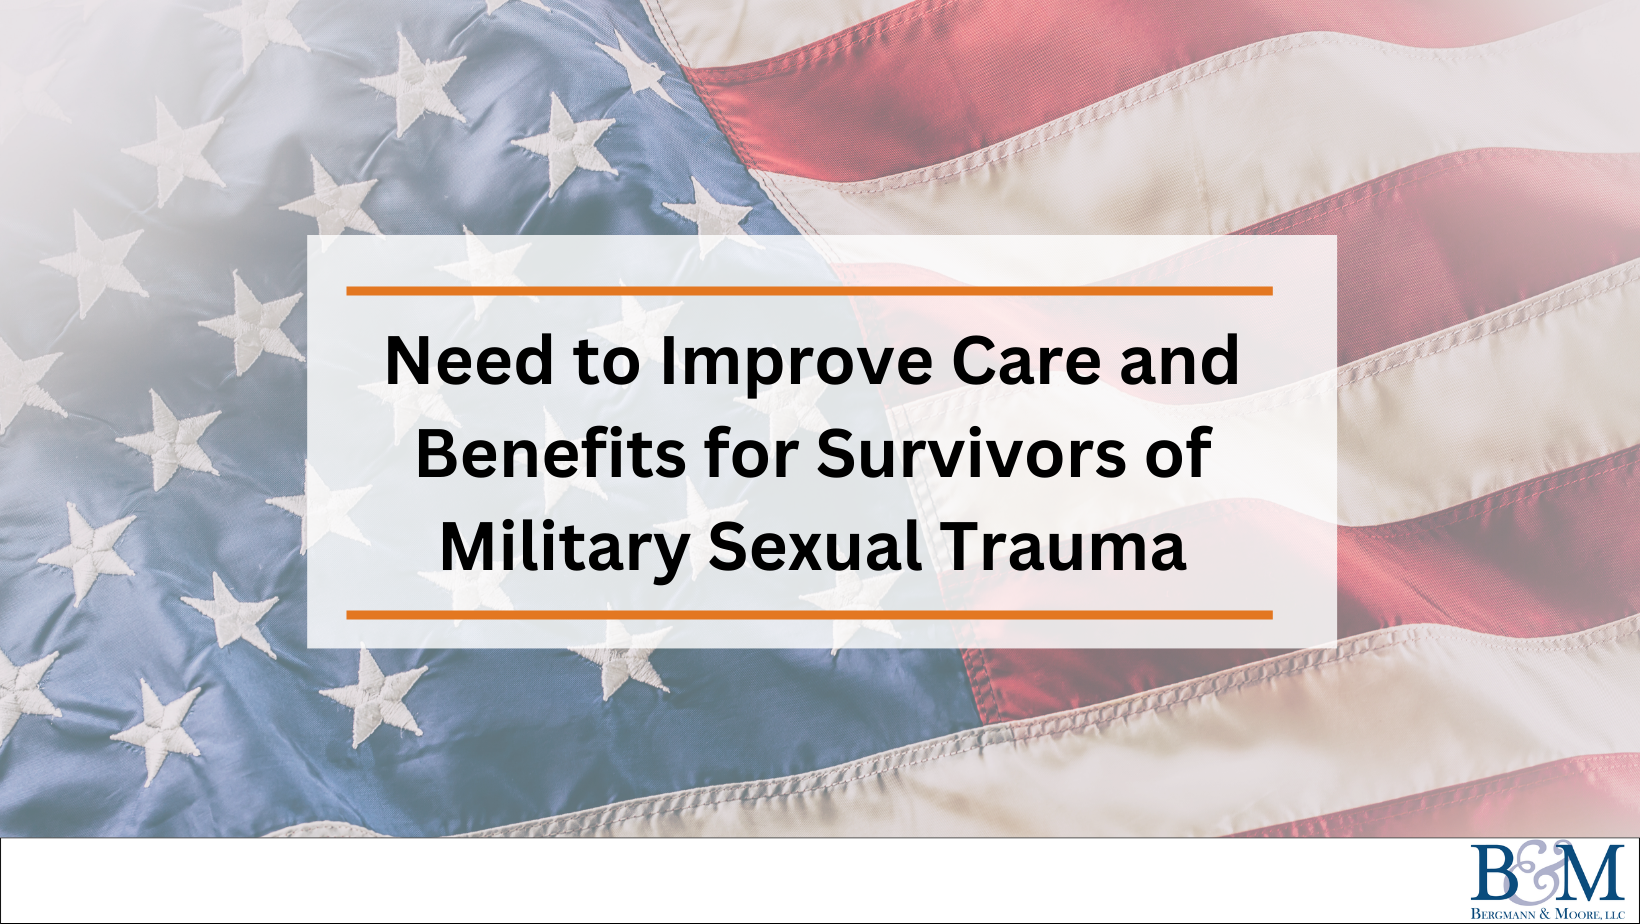 Need to Improve Care and Benefits for Survivors of Military Sexual Trauma